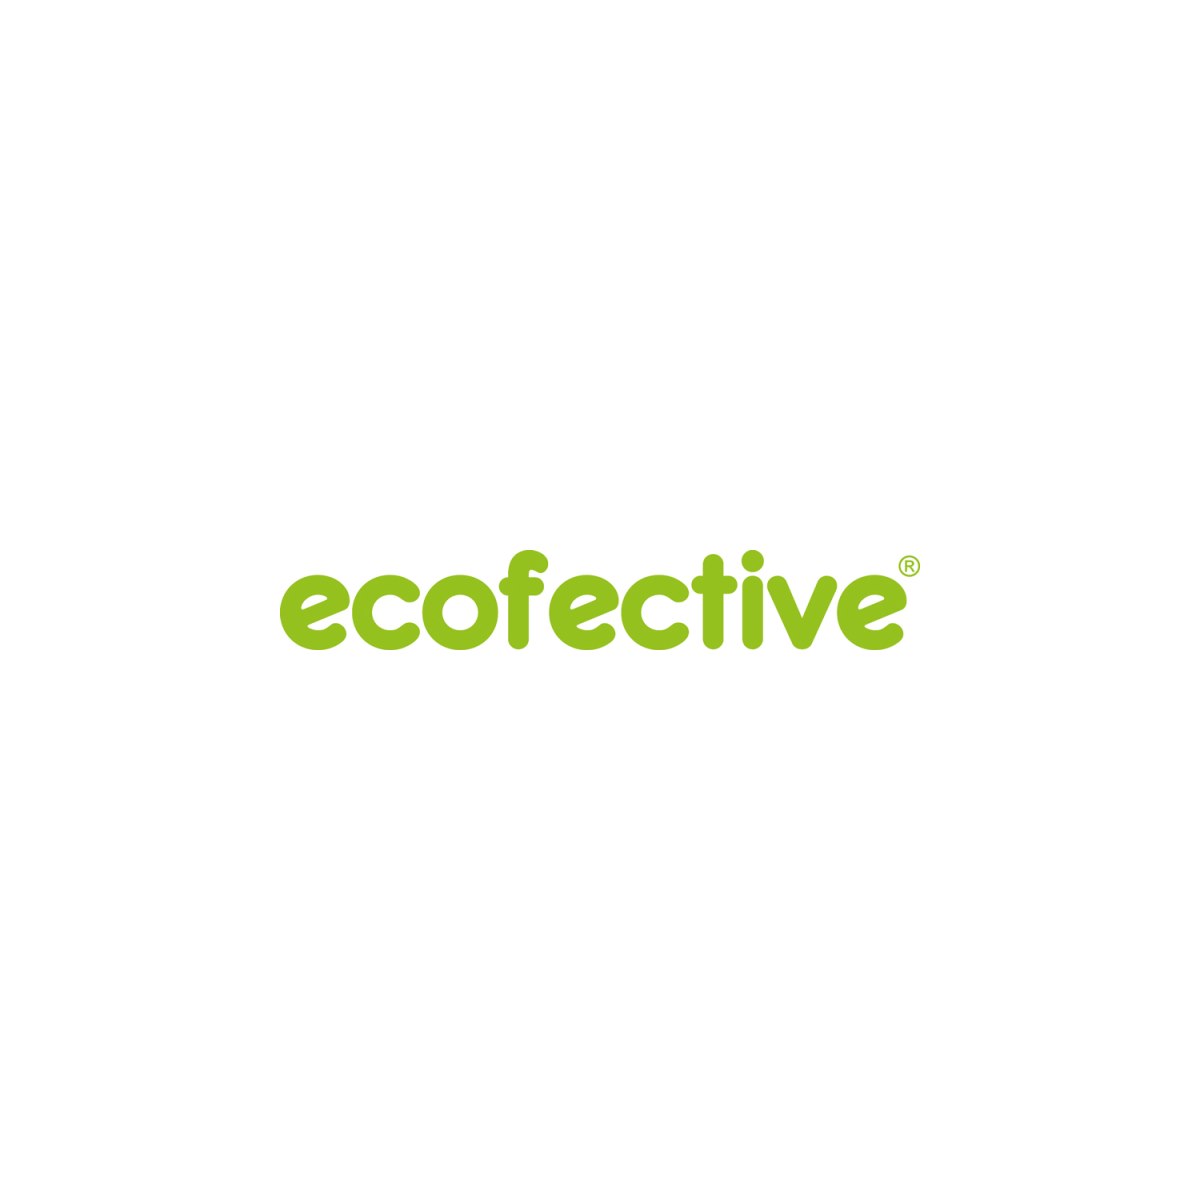 Where to Buy Ecofective Garden Care Products